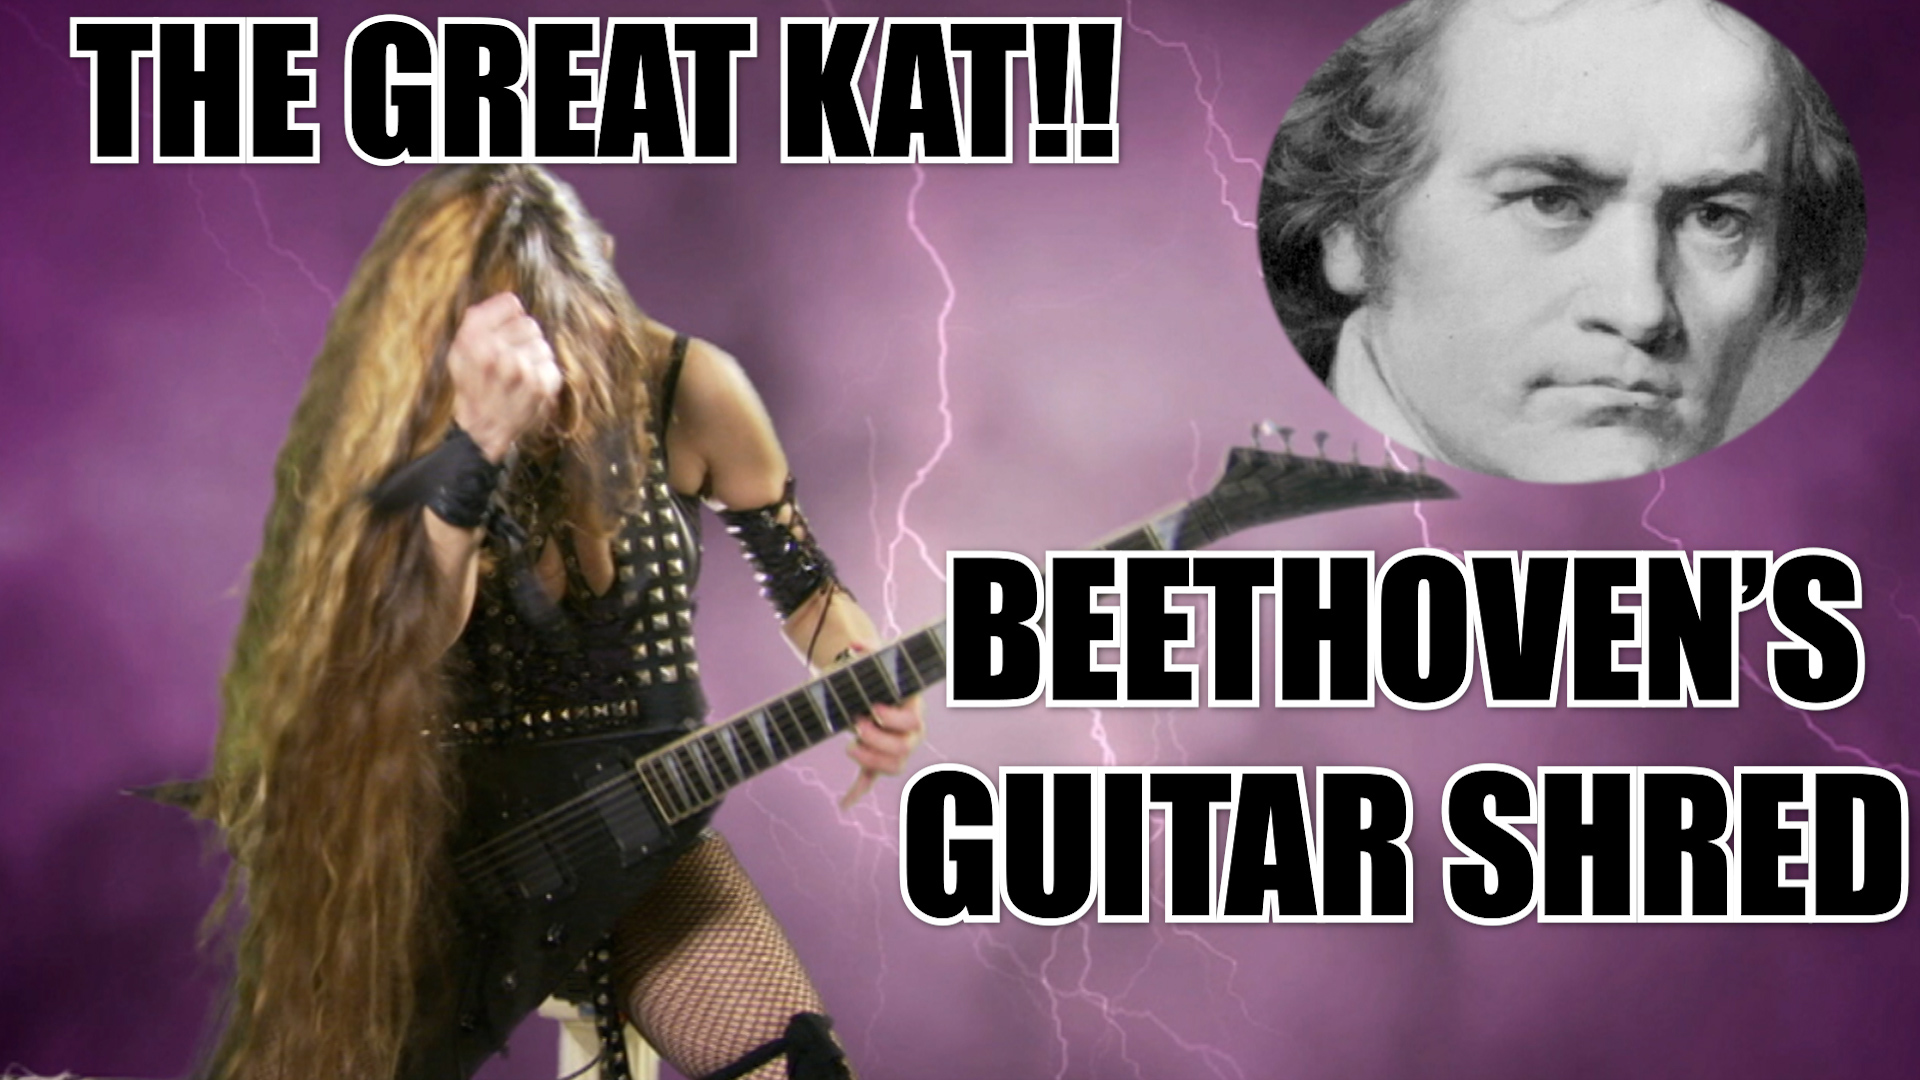 NEW BEETHOVENS GUITAR SHRED by THE GREAT KAT  7 VIDEO ShredFest (8 min) OUT NOW on VEVO, APPLE MUSIC!